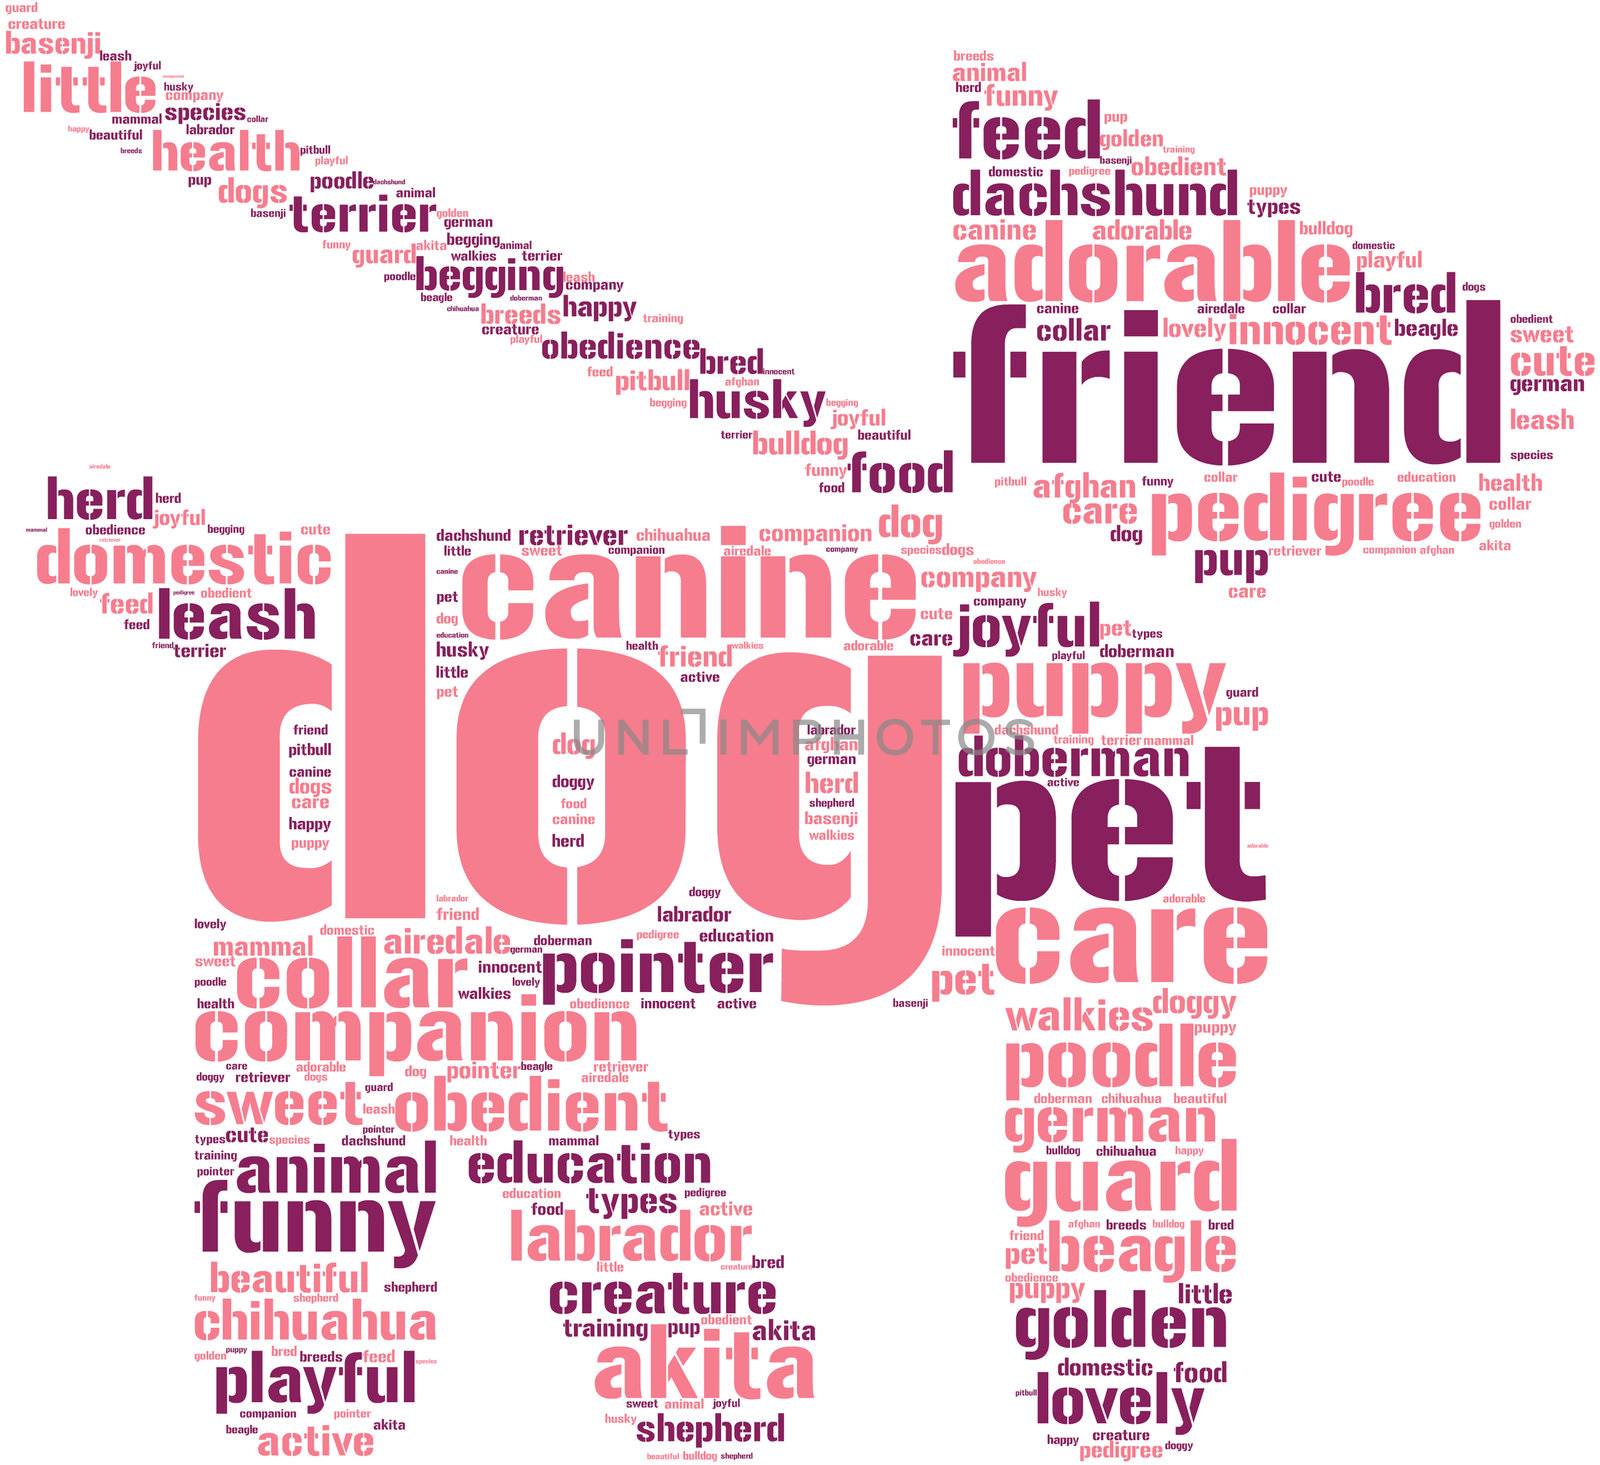 Dog and leash symbol tag cloud pictogram with red words on a white background